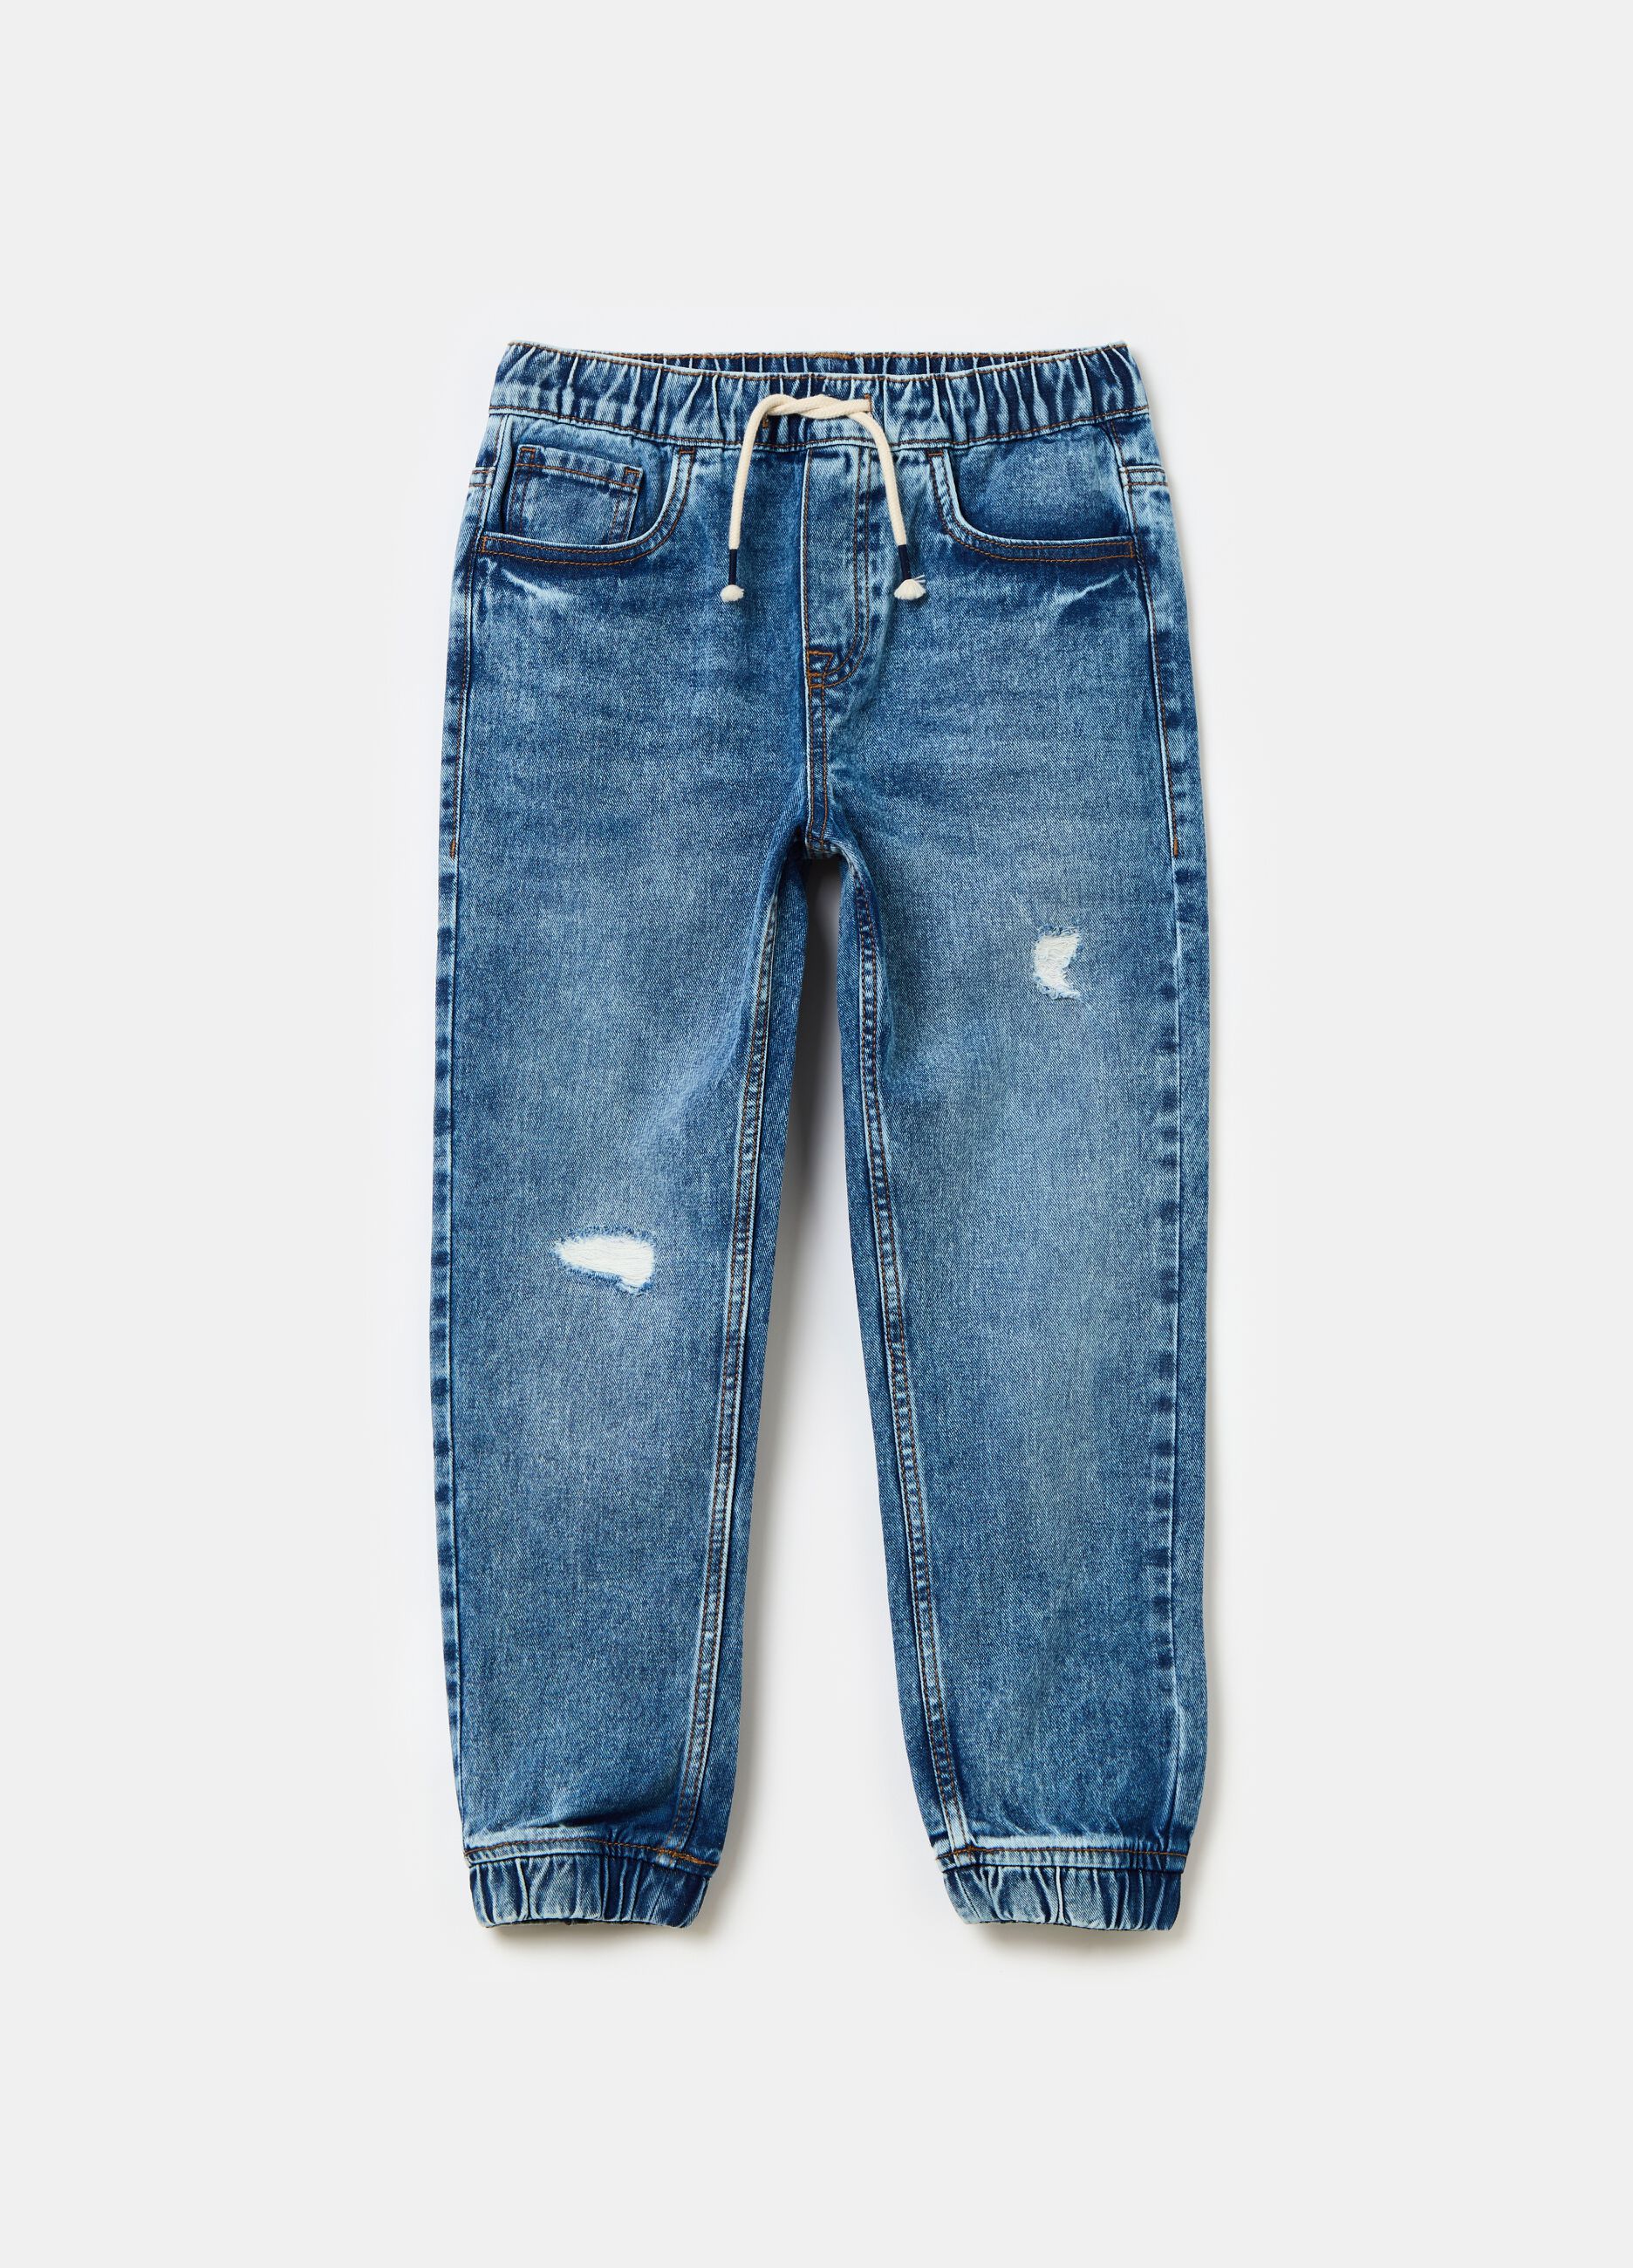 Acid wash denim joggers with abrasions